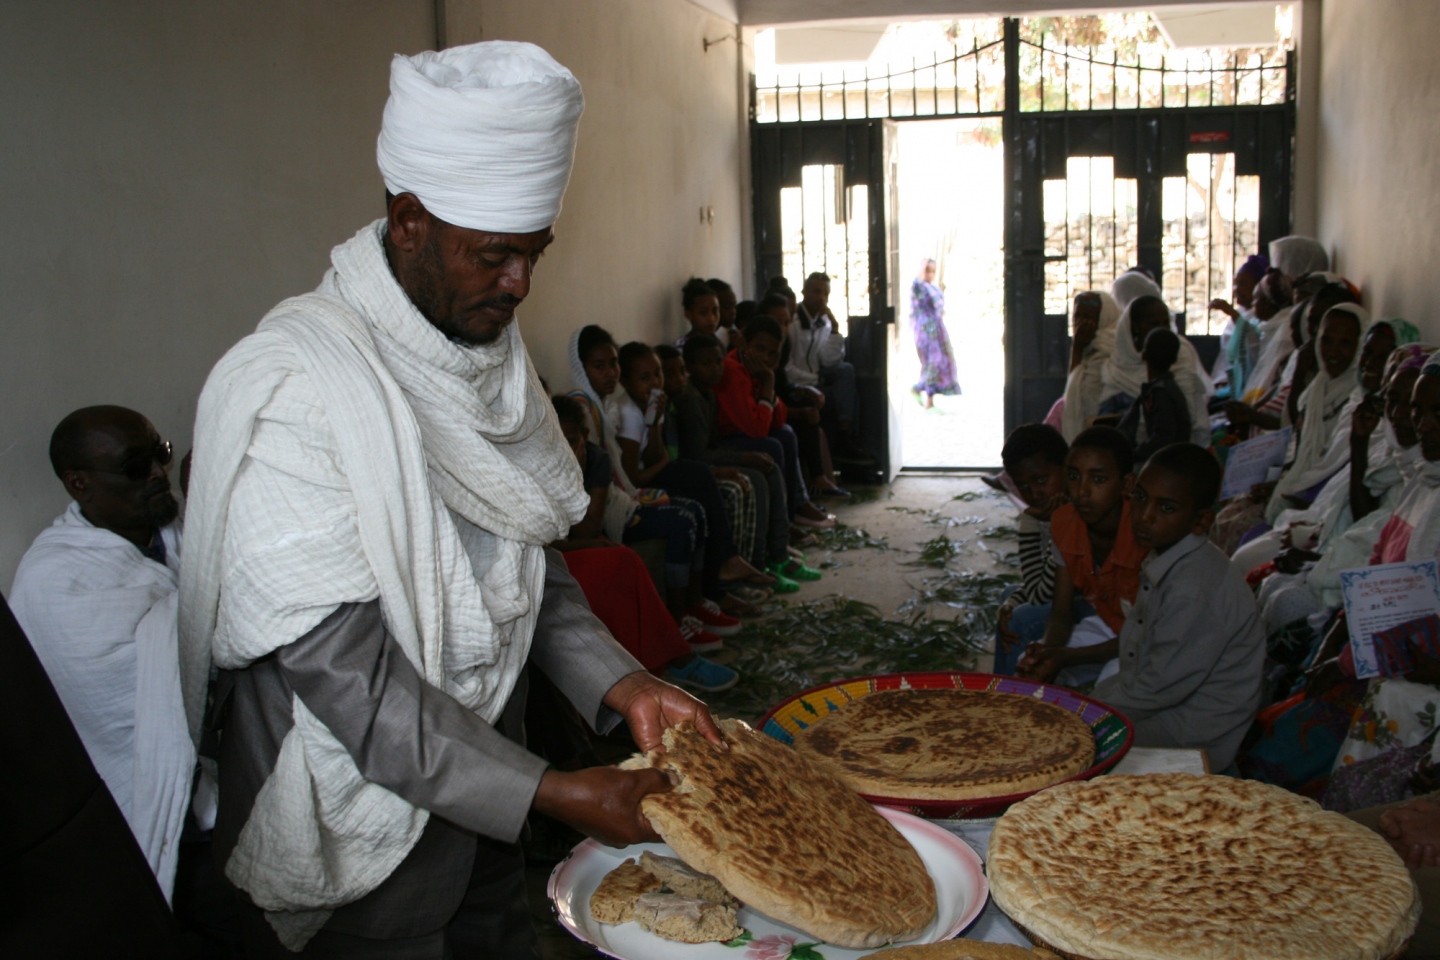 An Ethiopian man in a white turban and white scarf tears off a pieace of bread. He is in a room with a large group of people.